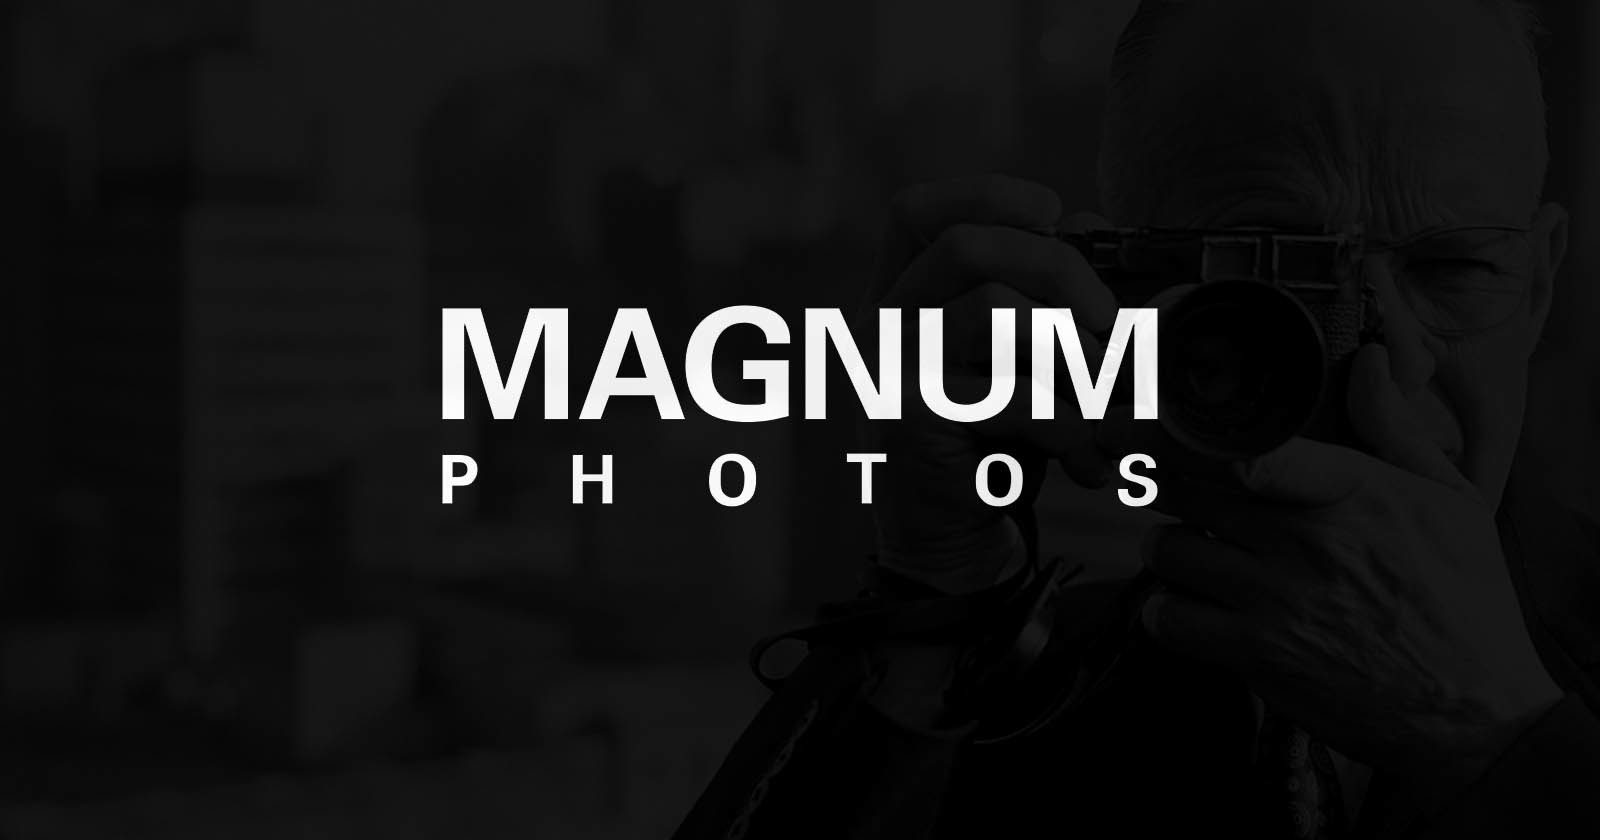  magnum photos publicly calls journalist slayings end 